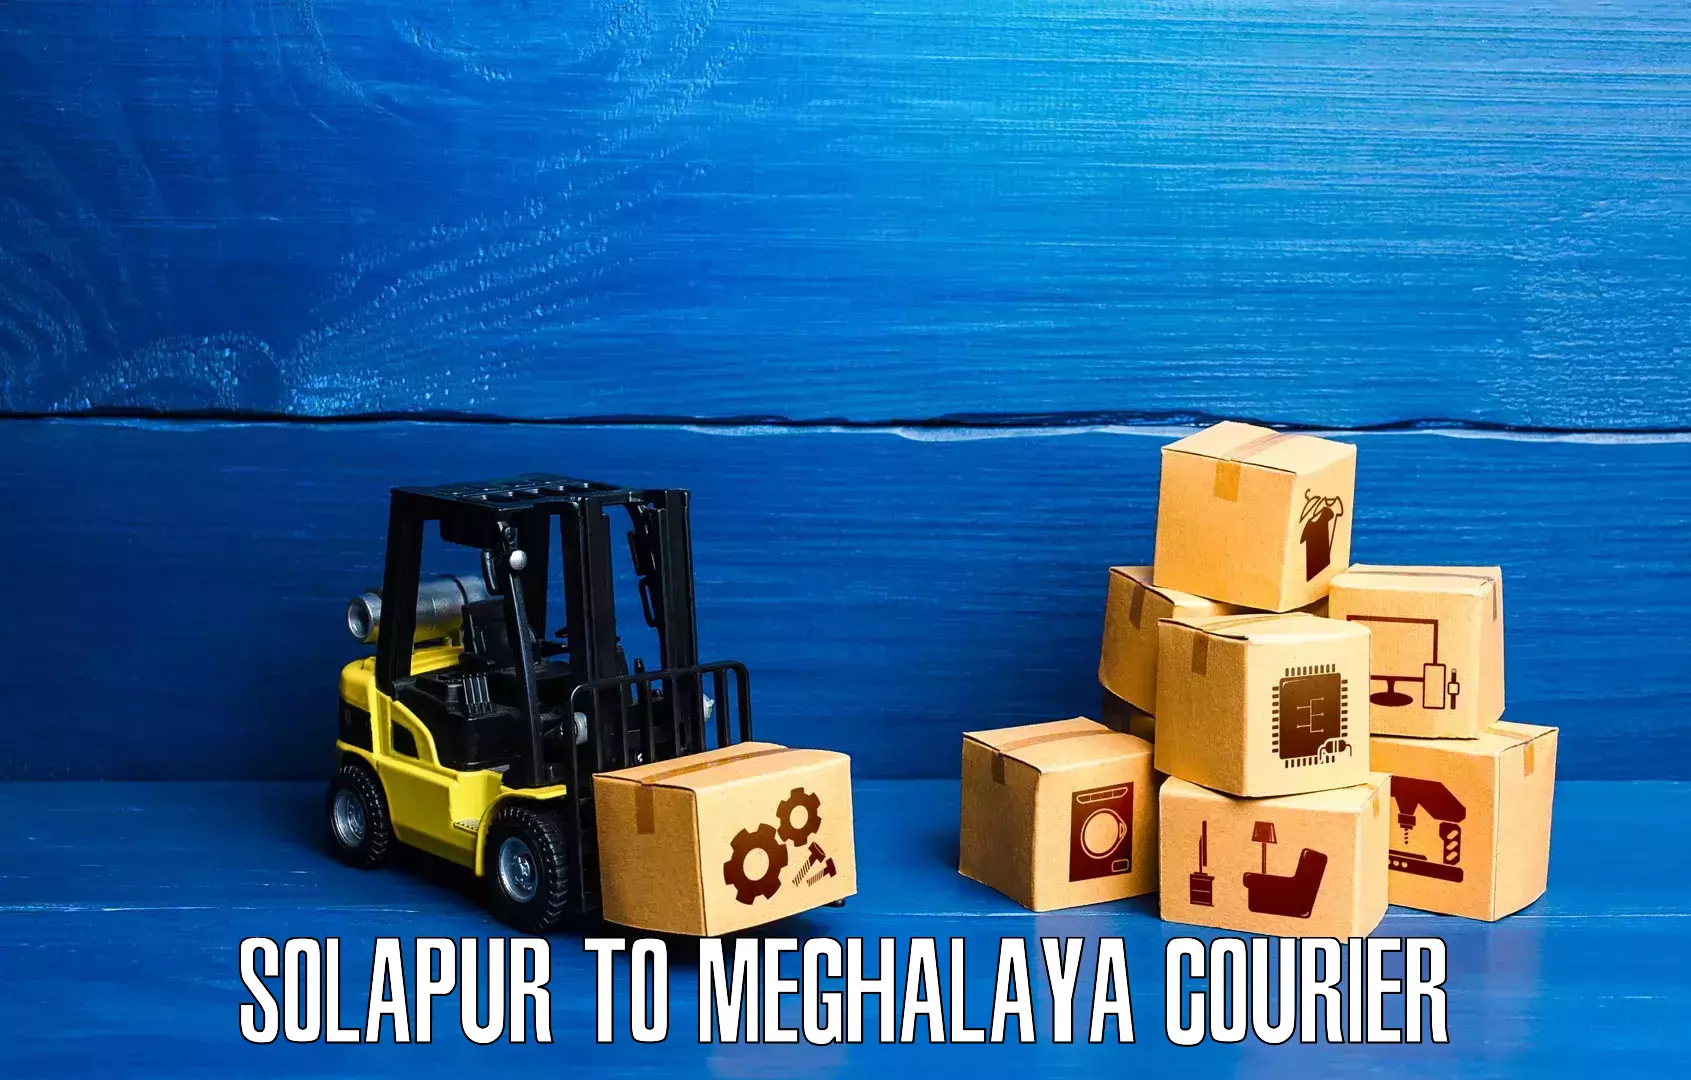 Round-the-clock parcel delivery Solapur to Meghalaya